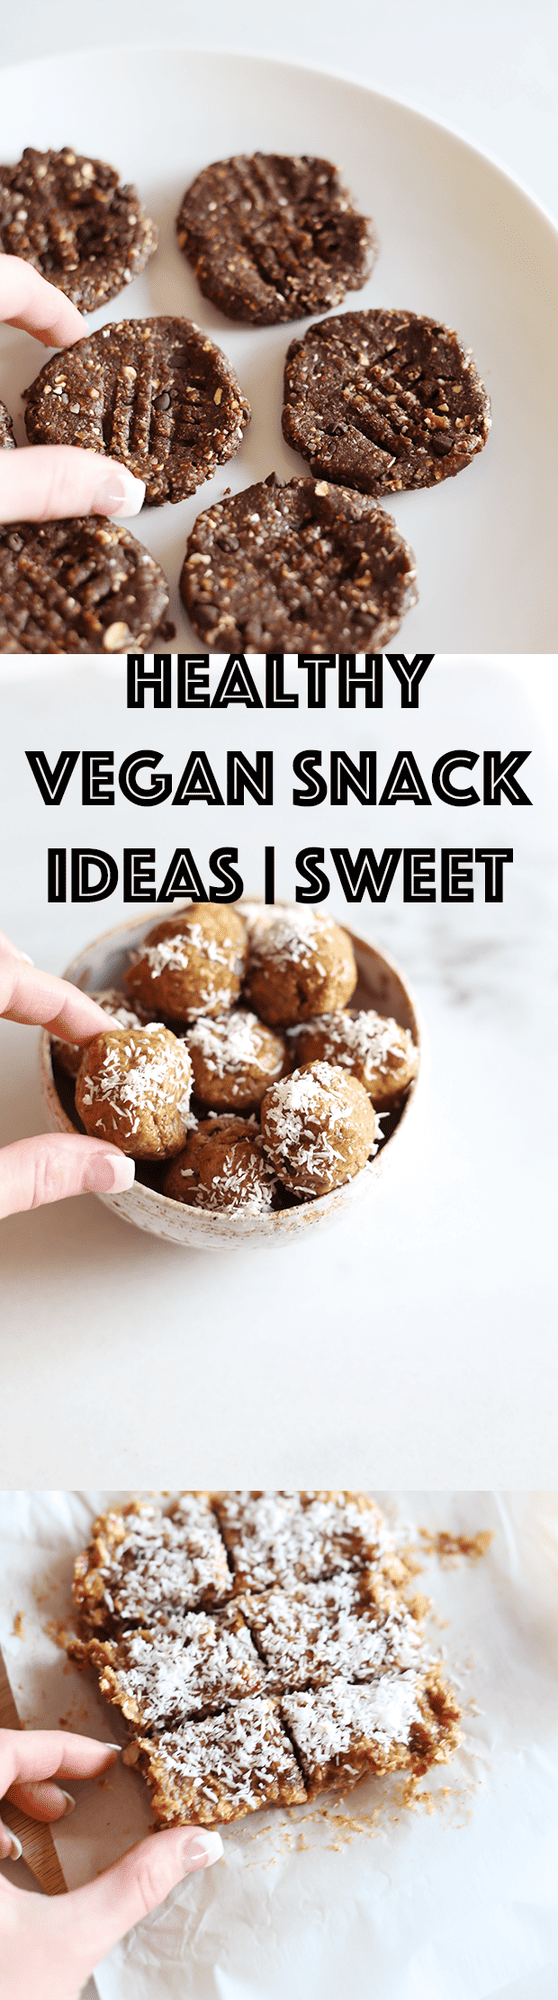 These Healthy Vegan Snack Ideas | SWEET are super quick and easy to make and show you how snacking can be sweet and healthy at the same time! | TwoRaspberries.com